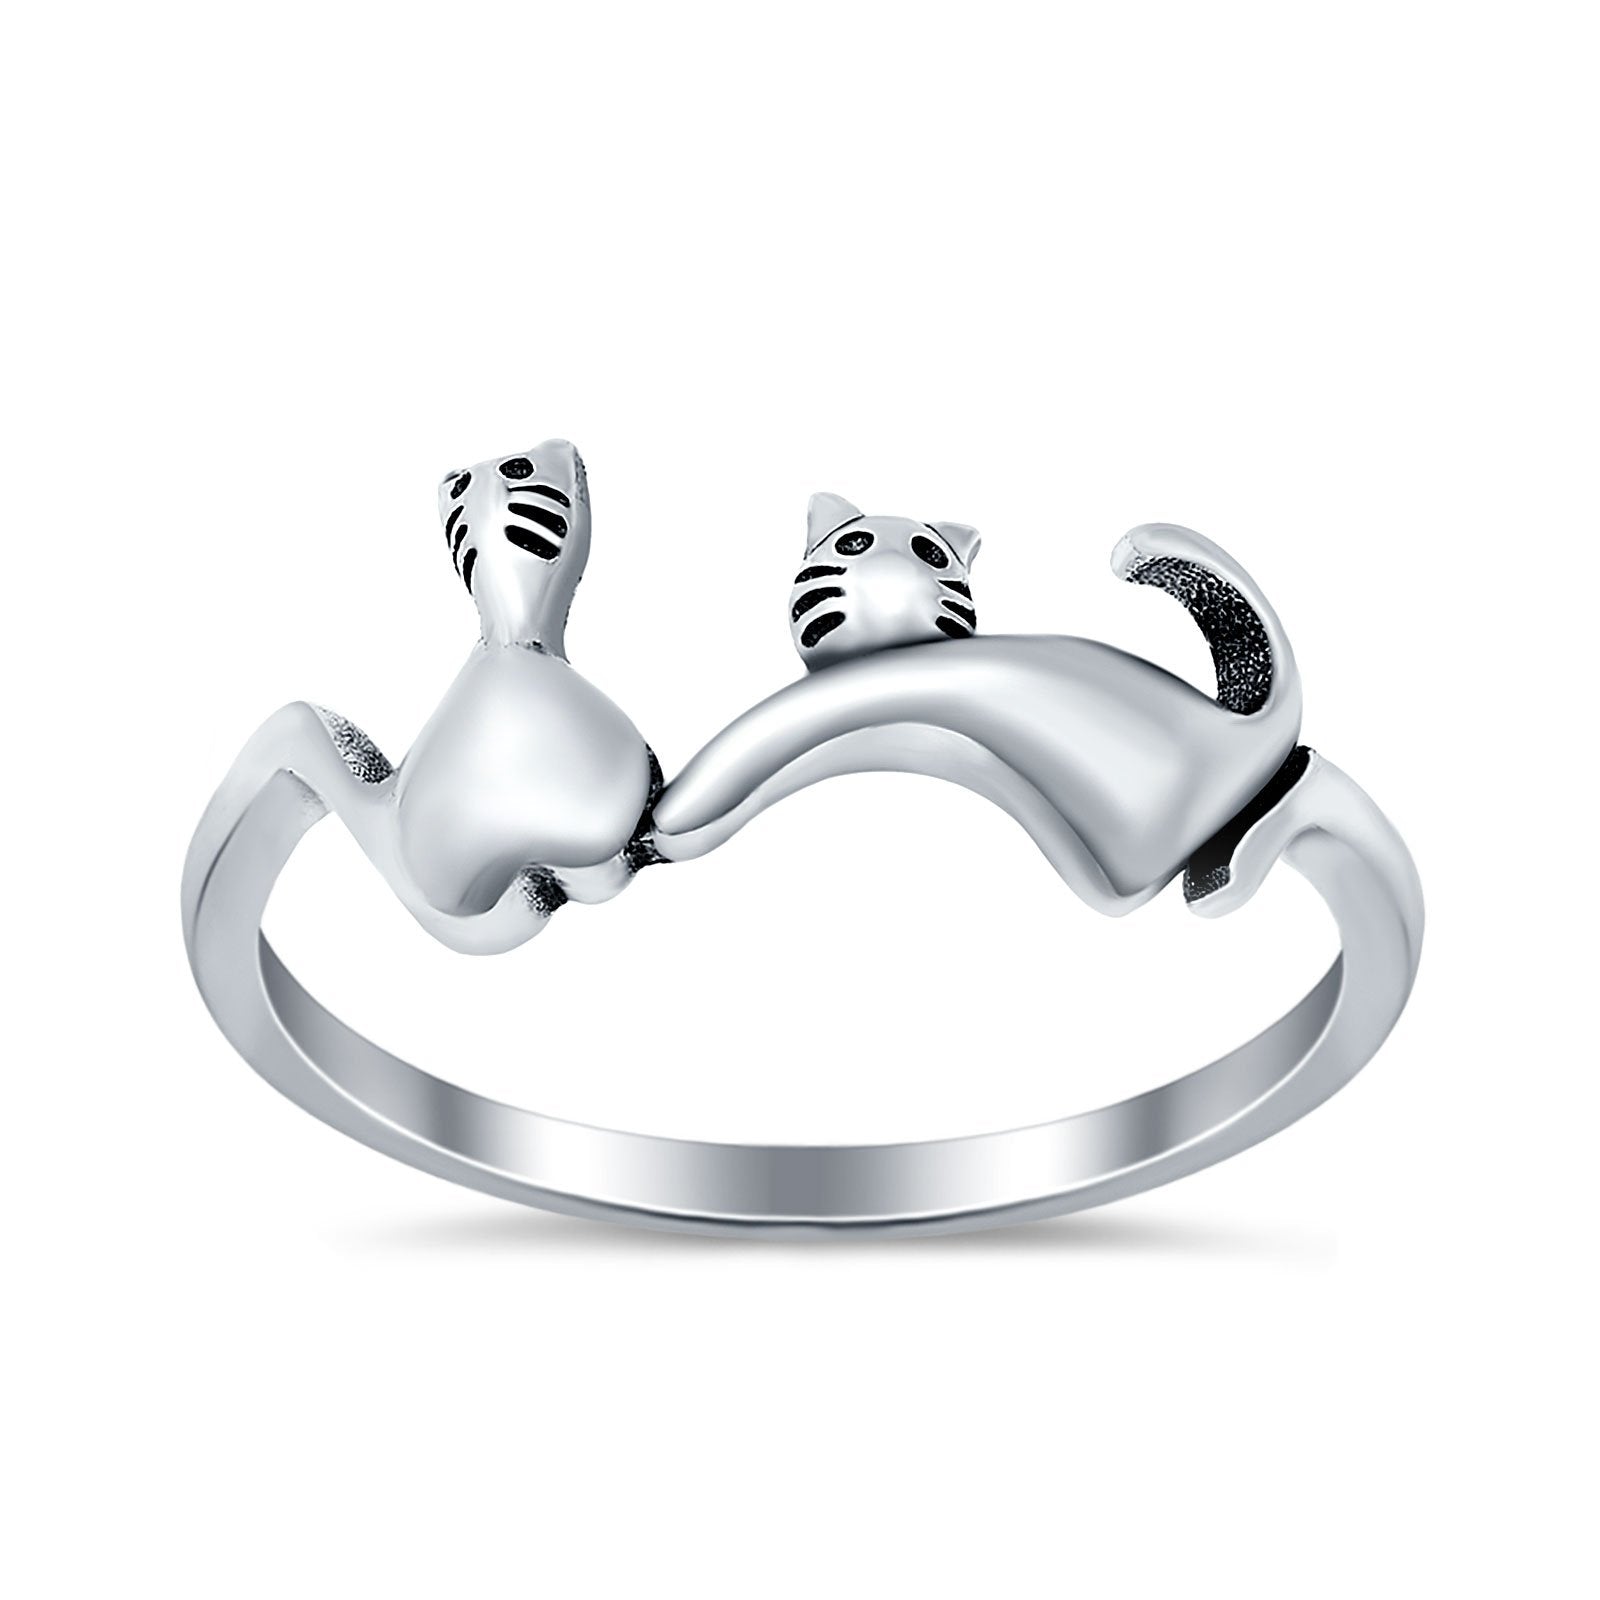 Sterling Silver Cats Ring for Girls Women Plain Band 925 Sterling Silver